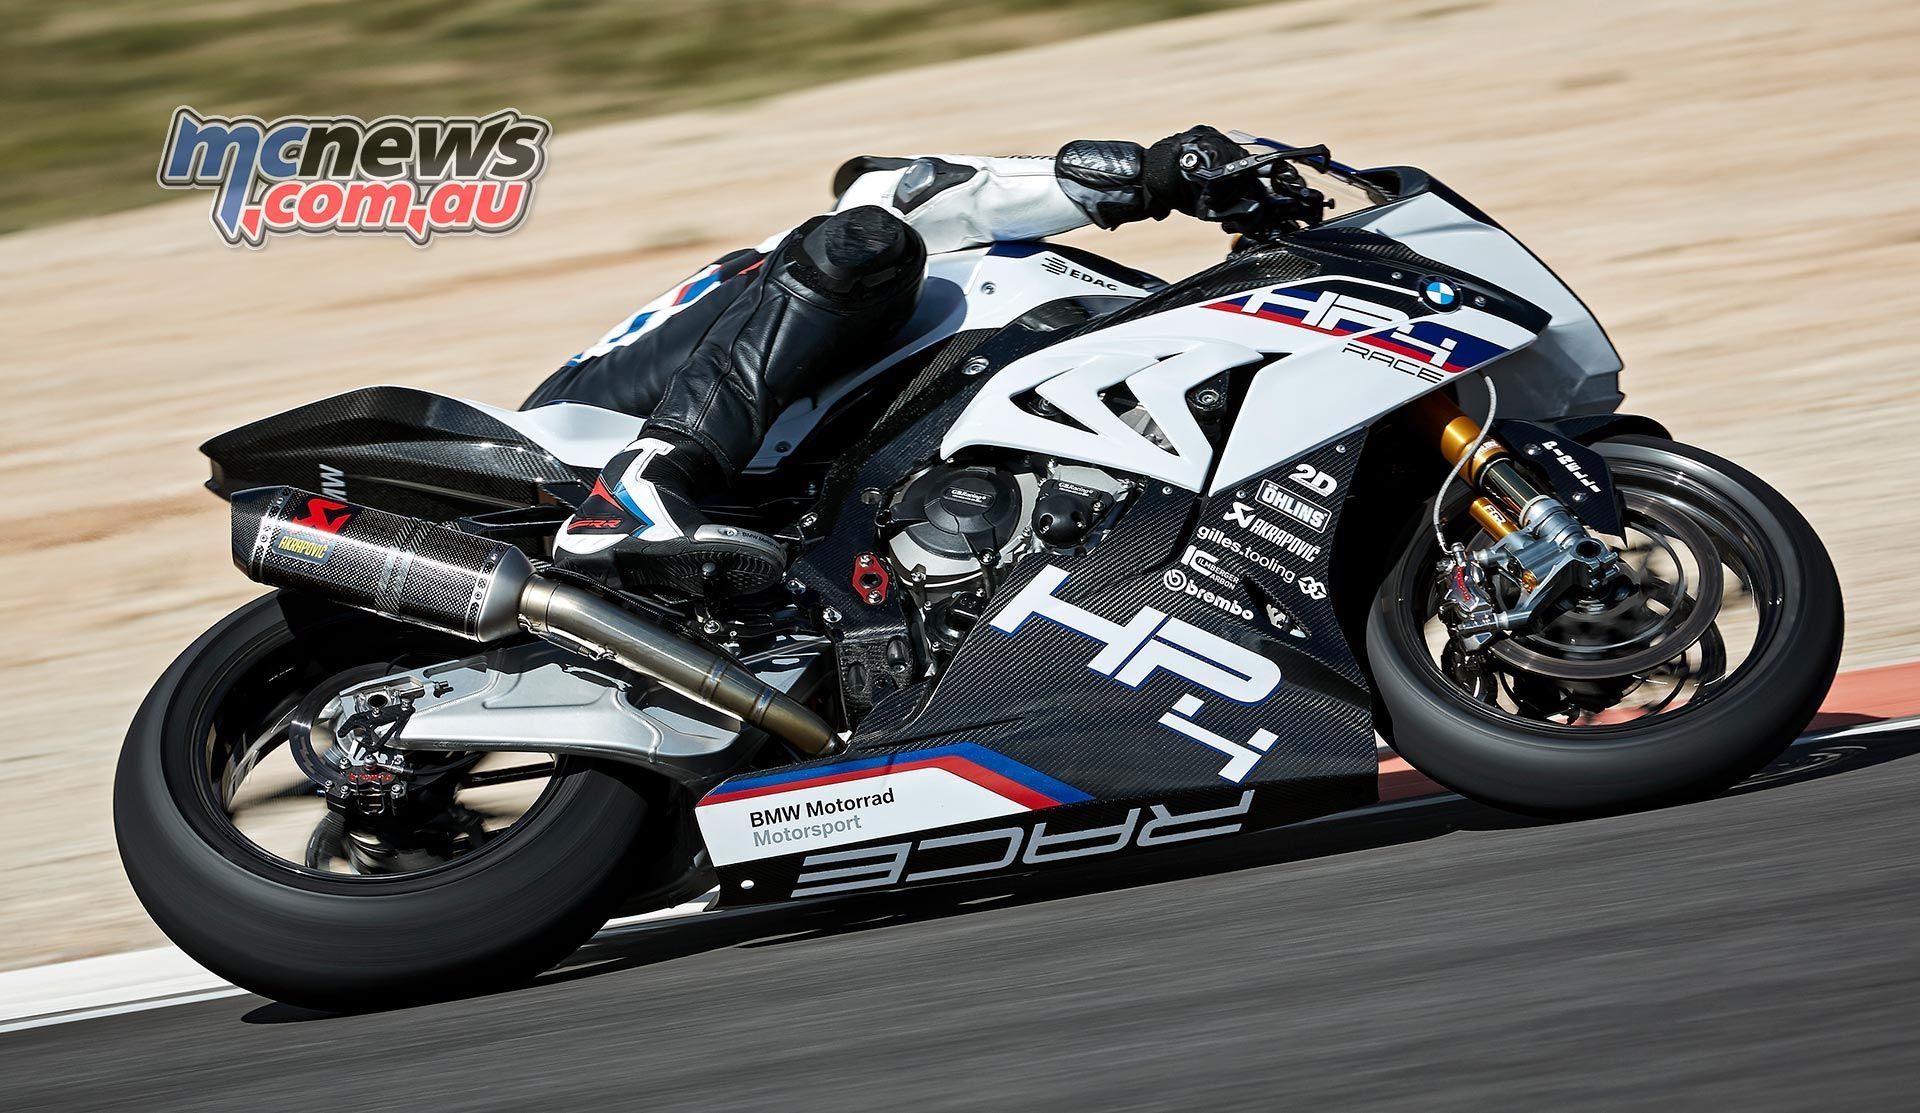 BMW S 1000 RR next level. Introducing HP4 Race